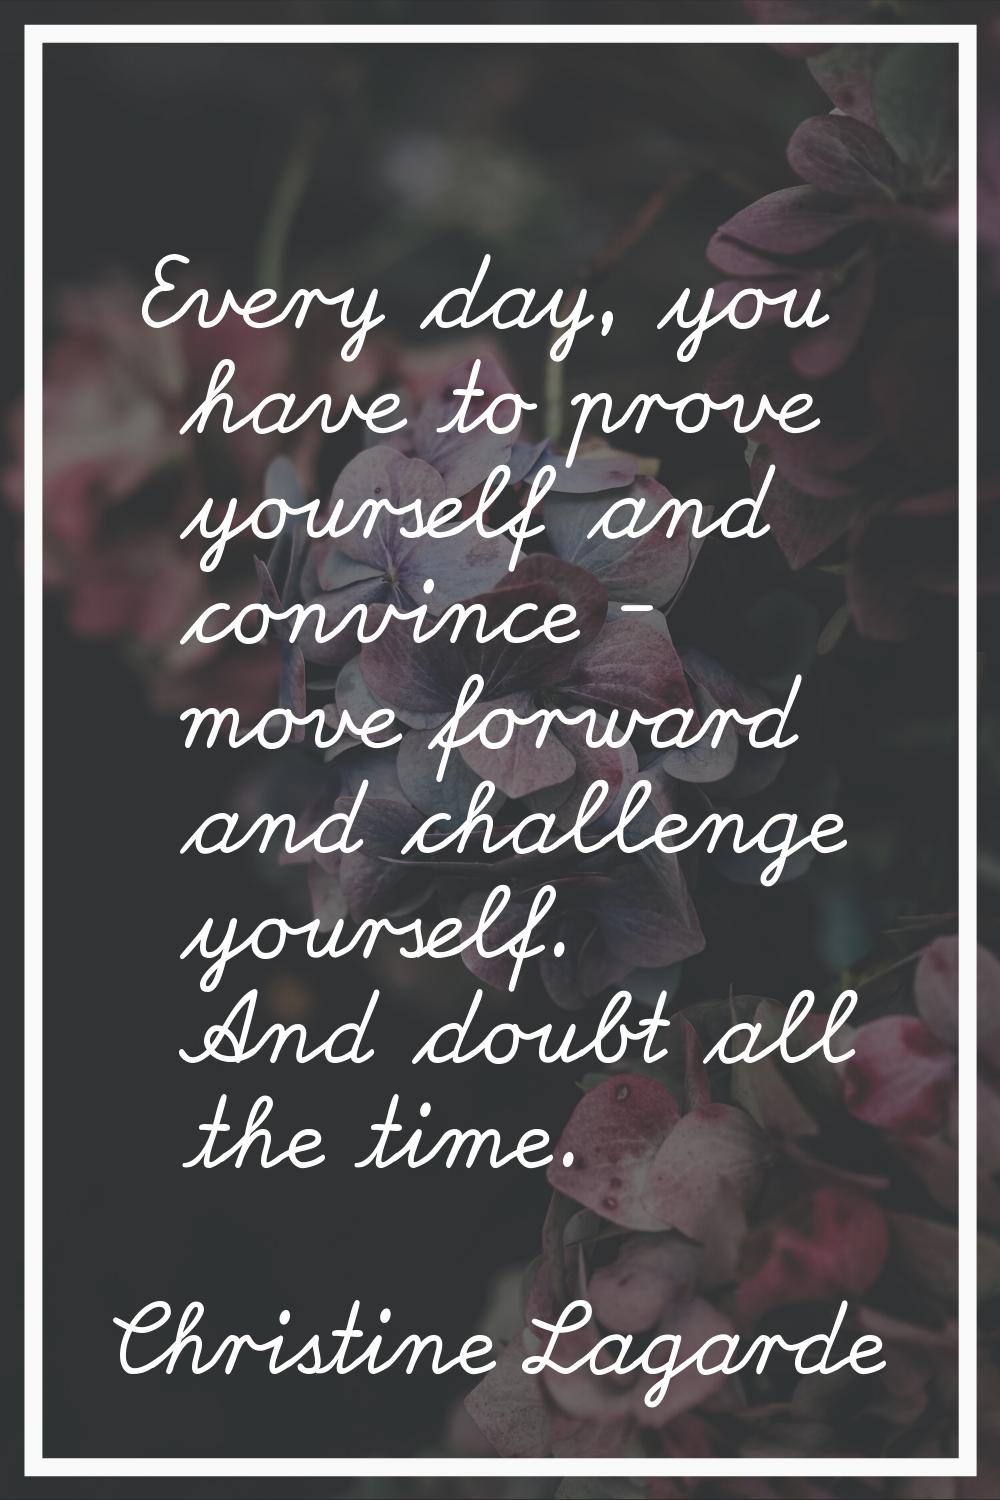 Every day, you have to prove yourself and convince - move forward and challenge yourself. And doubt